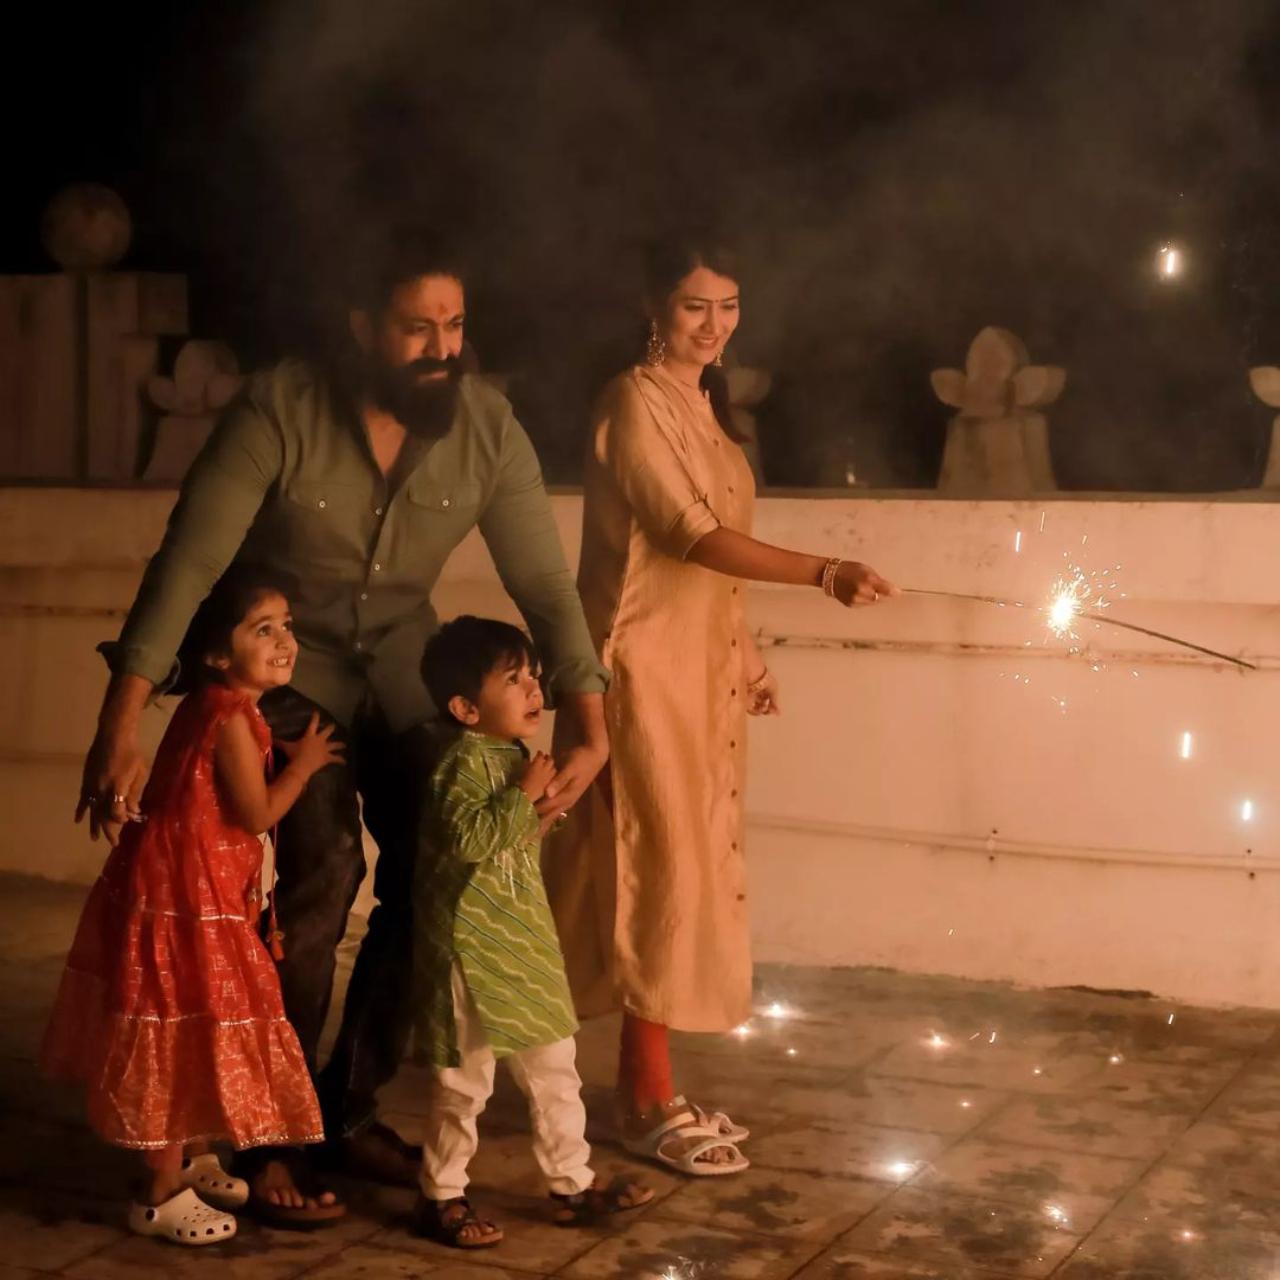 KGF star Yash's social media handle is flooded with happy pictures of his wife Radhika Pandit and their kids- Ayra and Yatharv